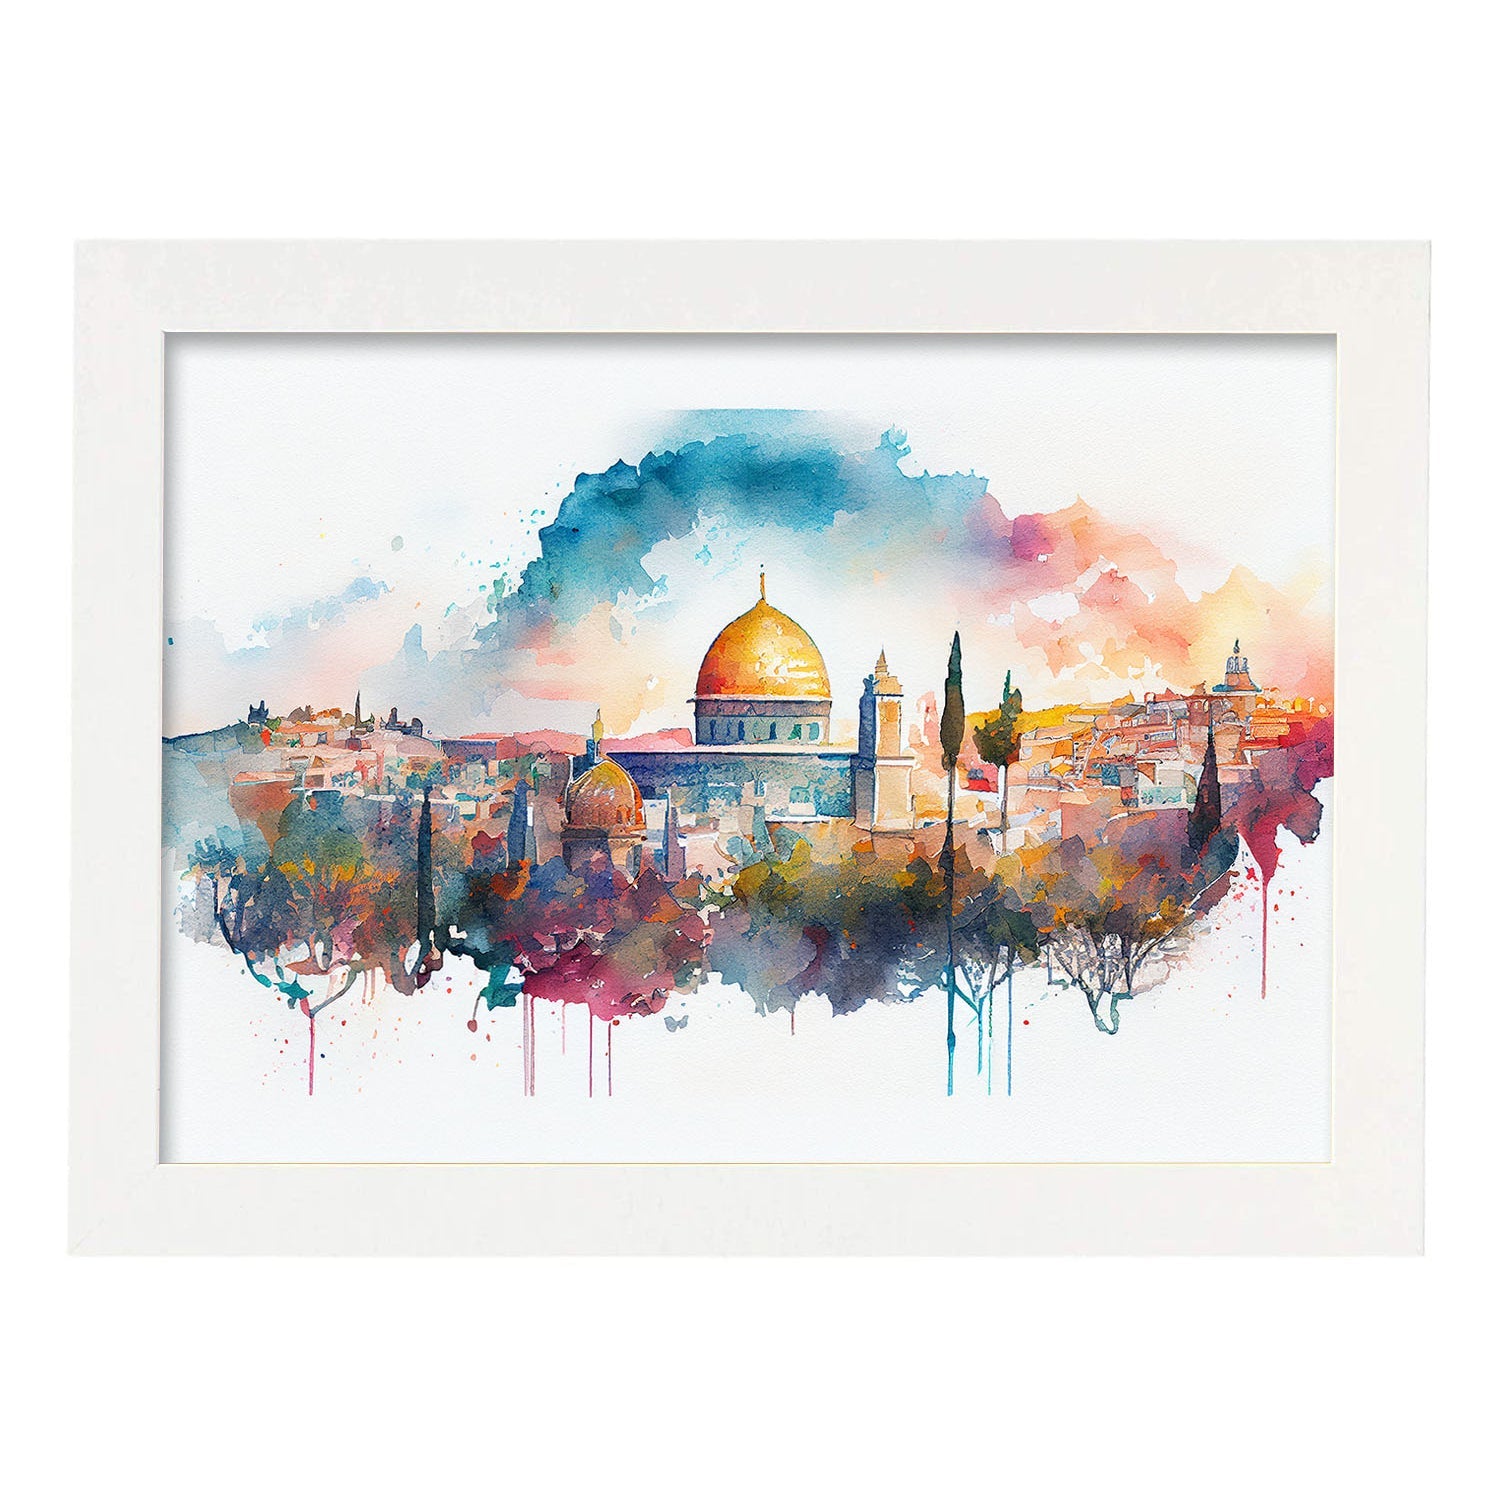 Nacnic watercolor of a skyline of the city of Jerusalem. Aesthetic Wall Art Prints for Bedroom or Living Room Design.-Artwork-Nacnic-A4-Marco Blanco-Nacnic Estudio SL